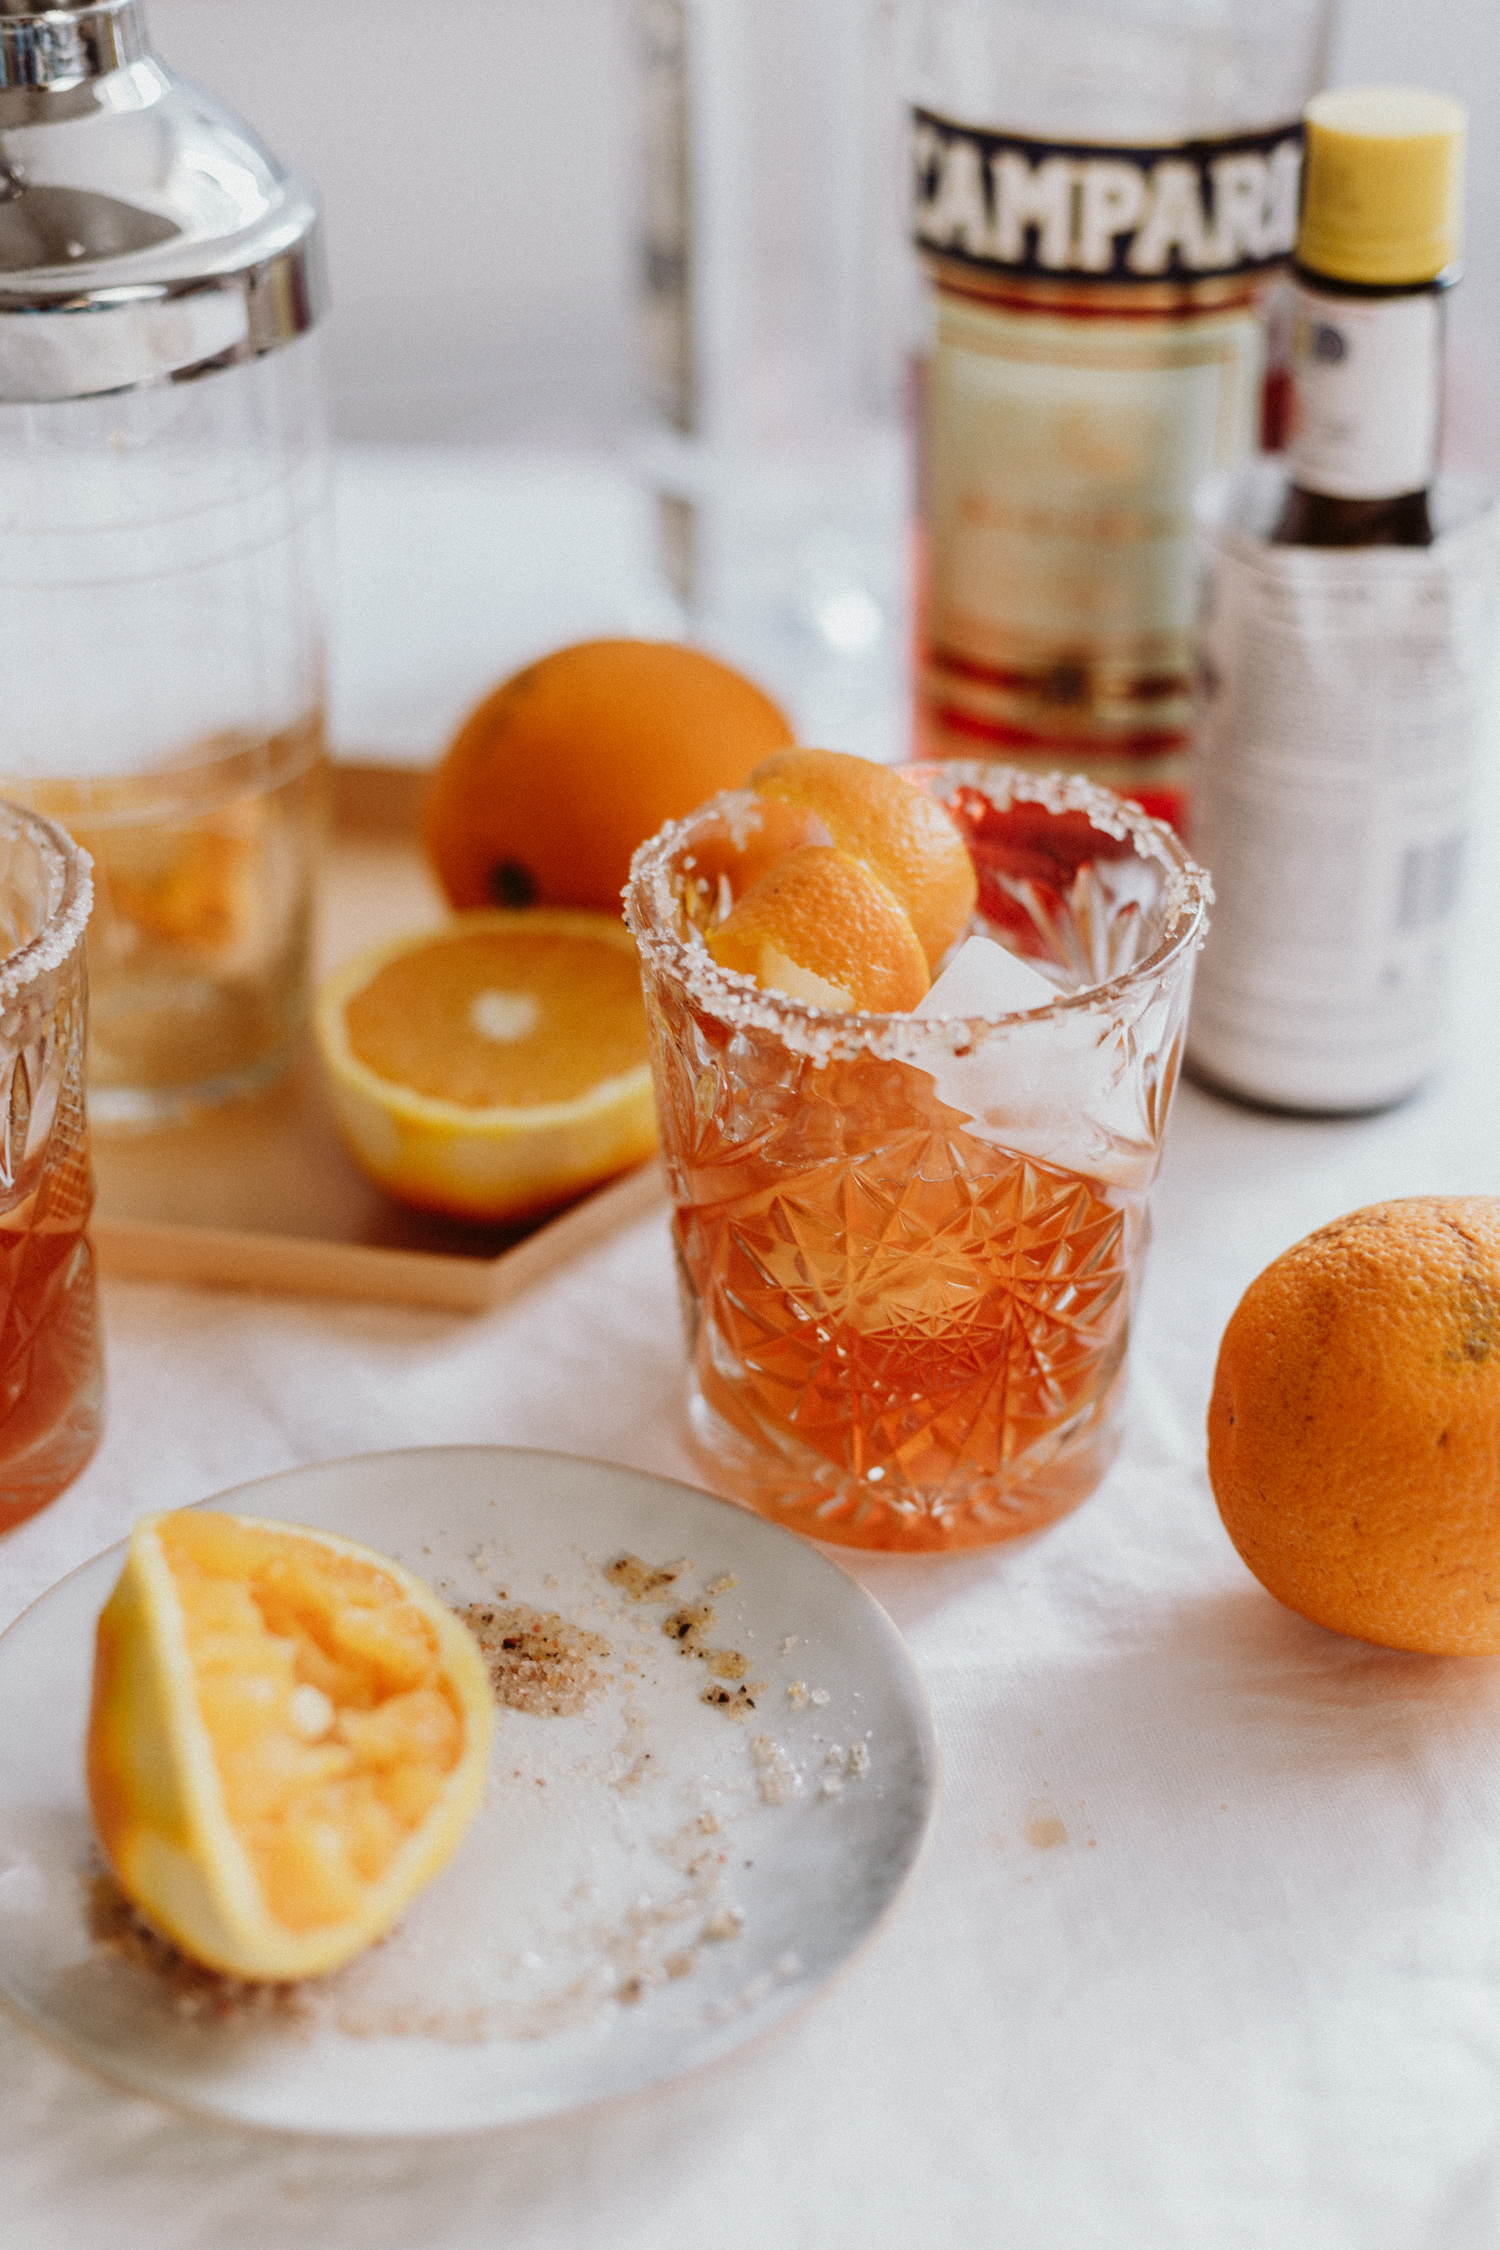 Salted Negroni Recipe: A cocktail classic with a twist - Love Daily Dose